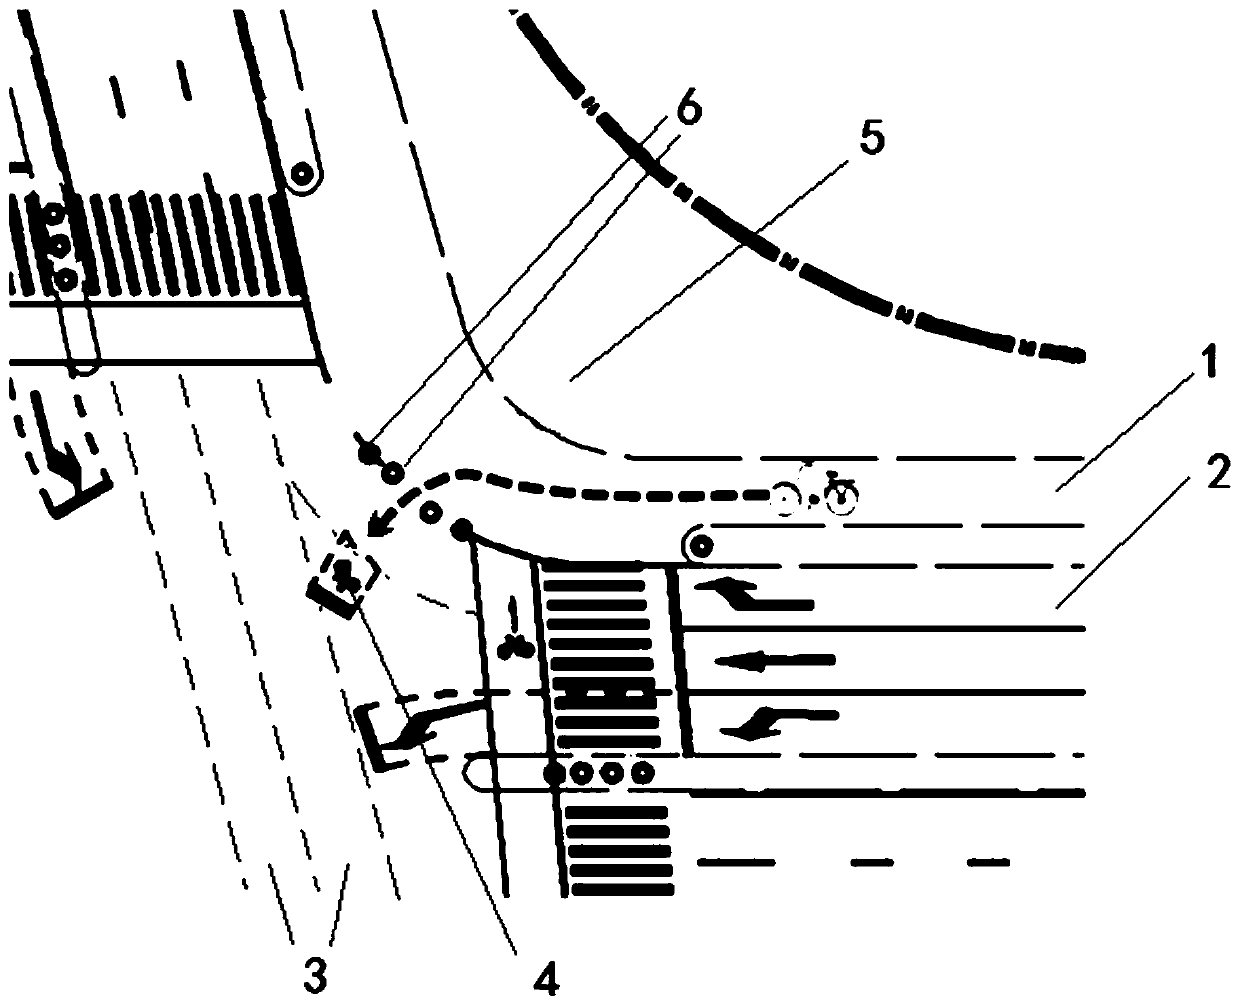 Intersection with non-motor vehicle left-turn waiting areas